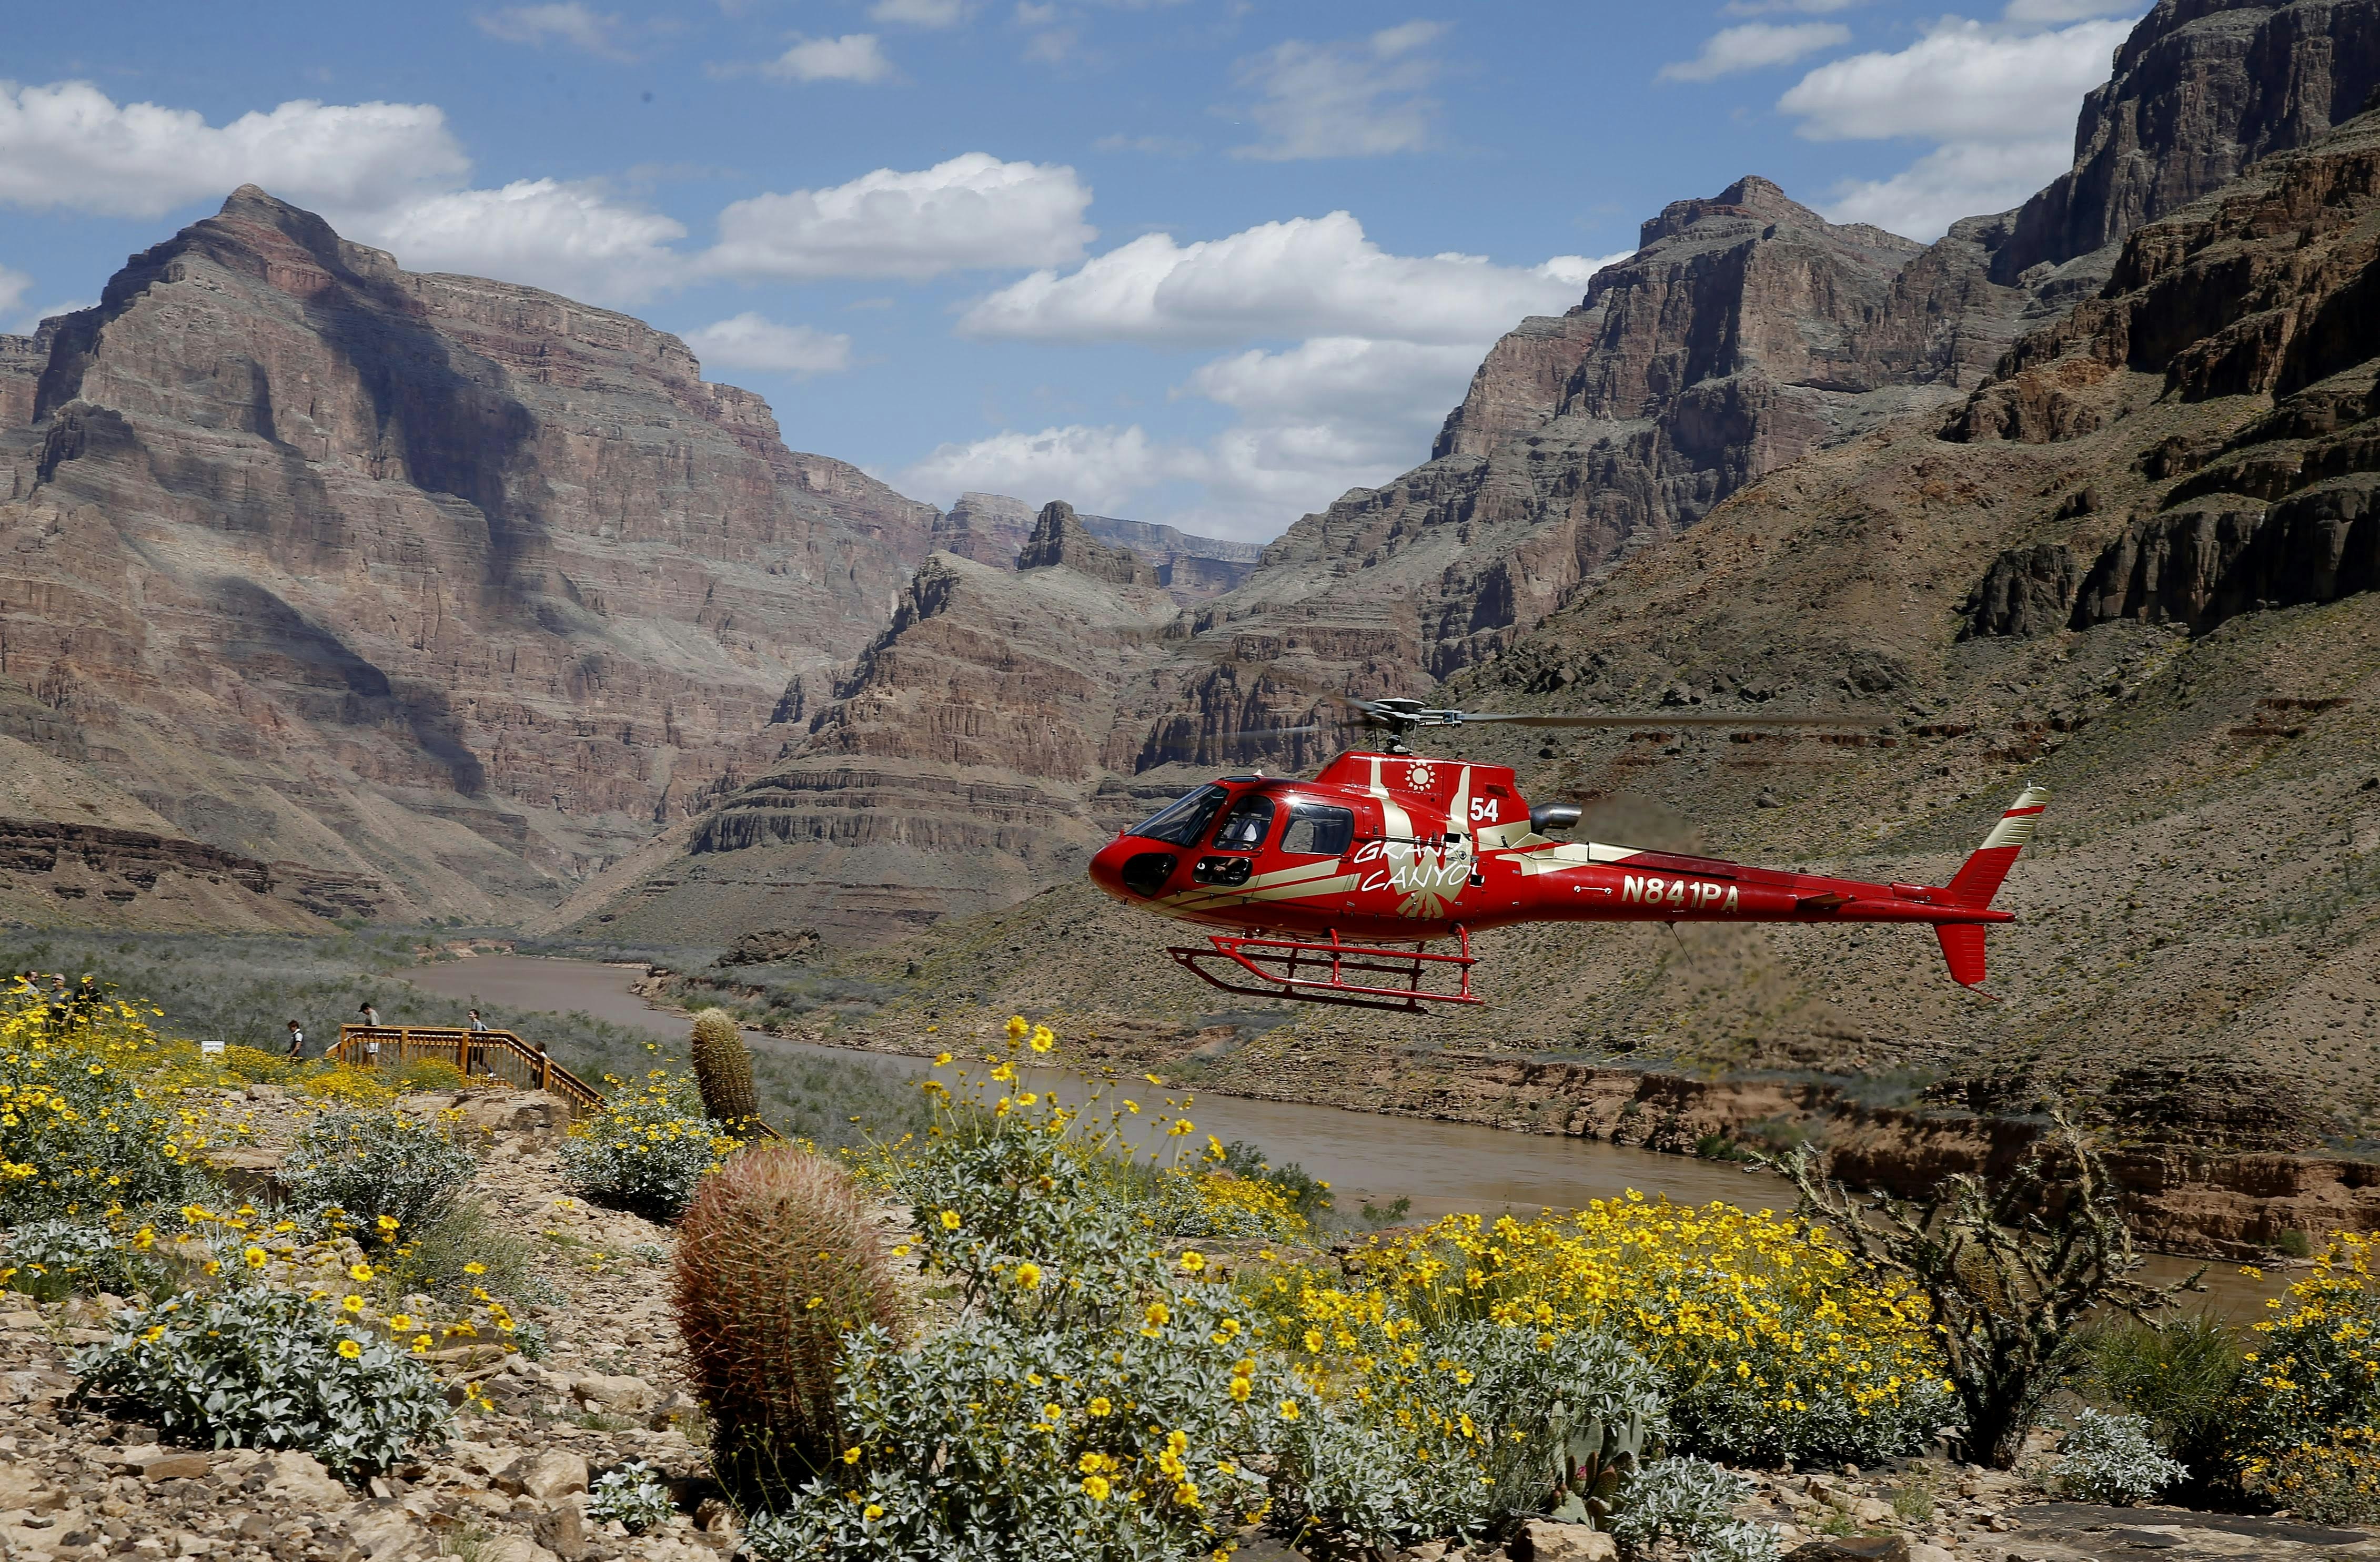 A helicopter takes off from the rim of the Grand Canyon